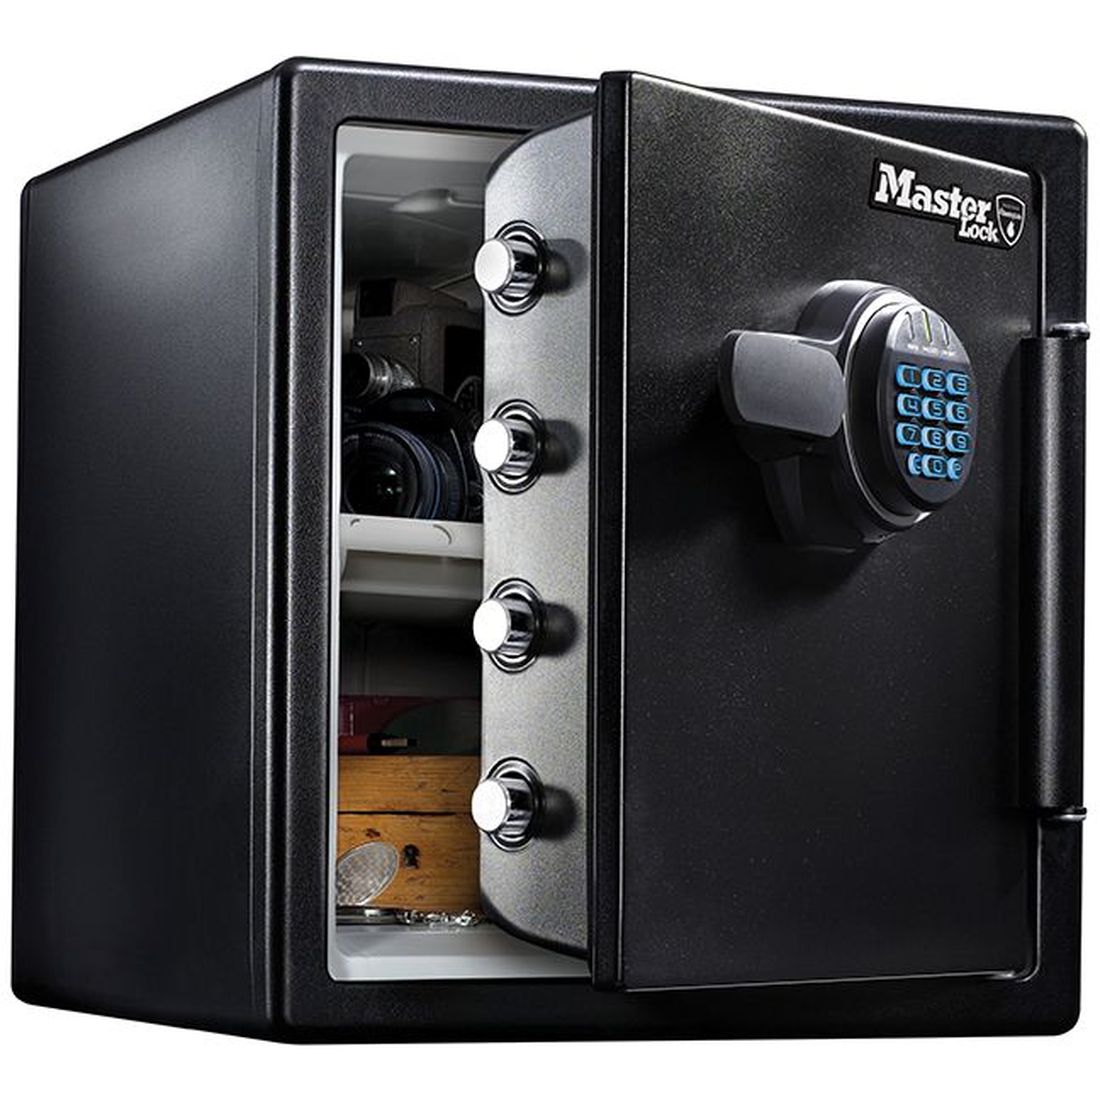 Master Lock Extra Large Digital Fire & Water Safe                                           